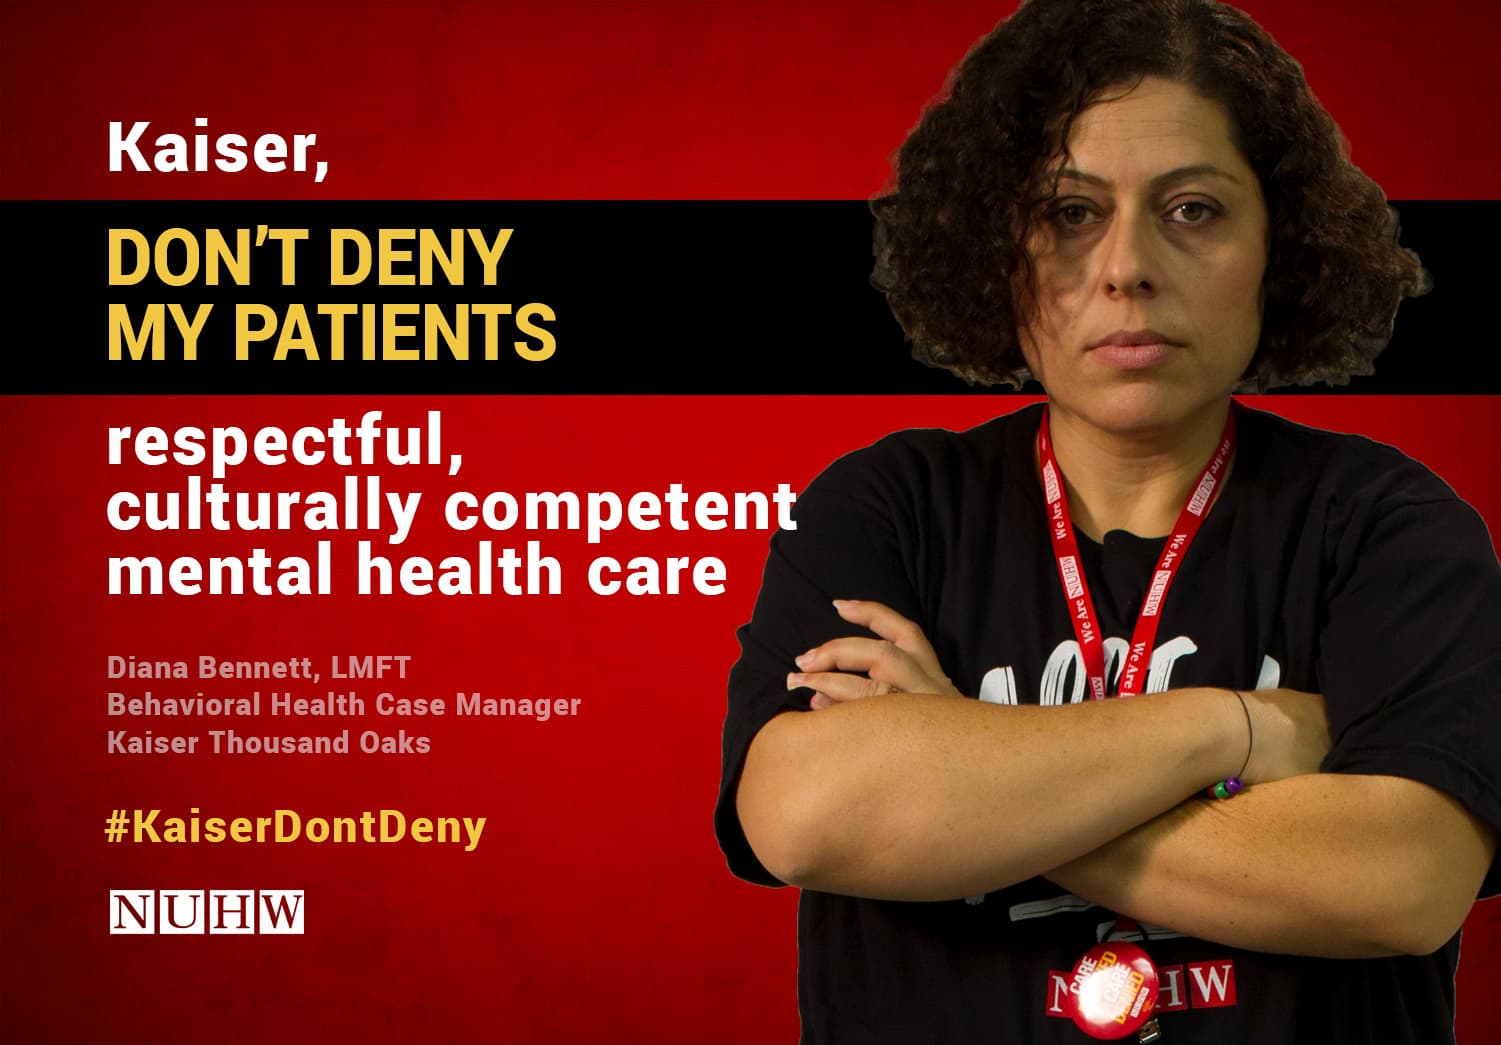 Kaiser, don't deny my patients respectful, culturally competent mental health care. -- Diana Bennett, LMFT, Behavioral Health Case Manager, Kaiser Thousand Oaks